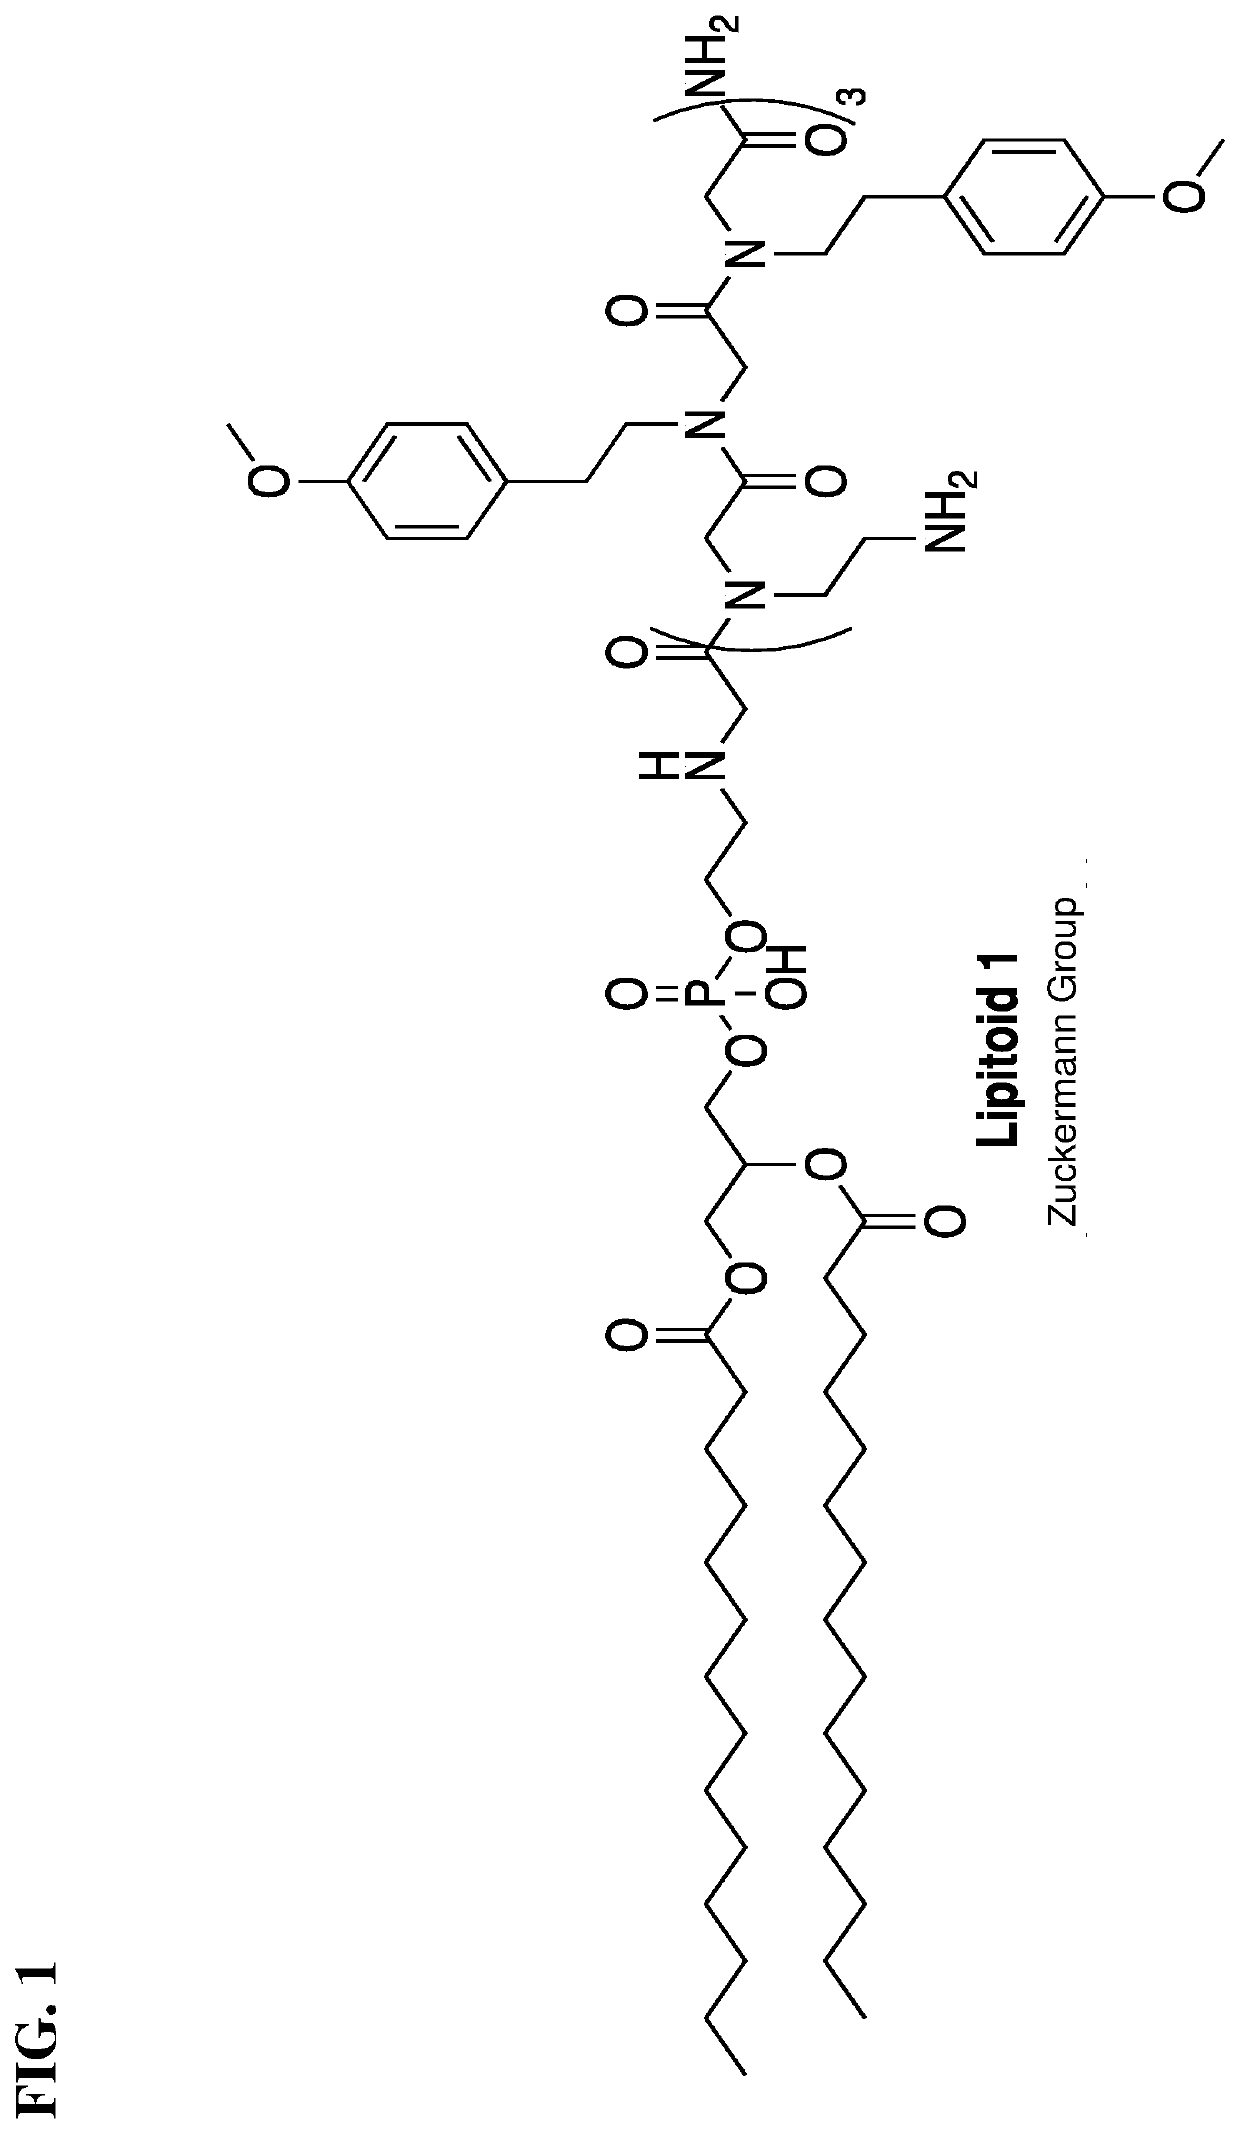 Lipidated cationic peptide-peg compositions for nucleic acid delivery